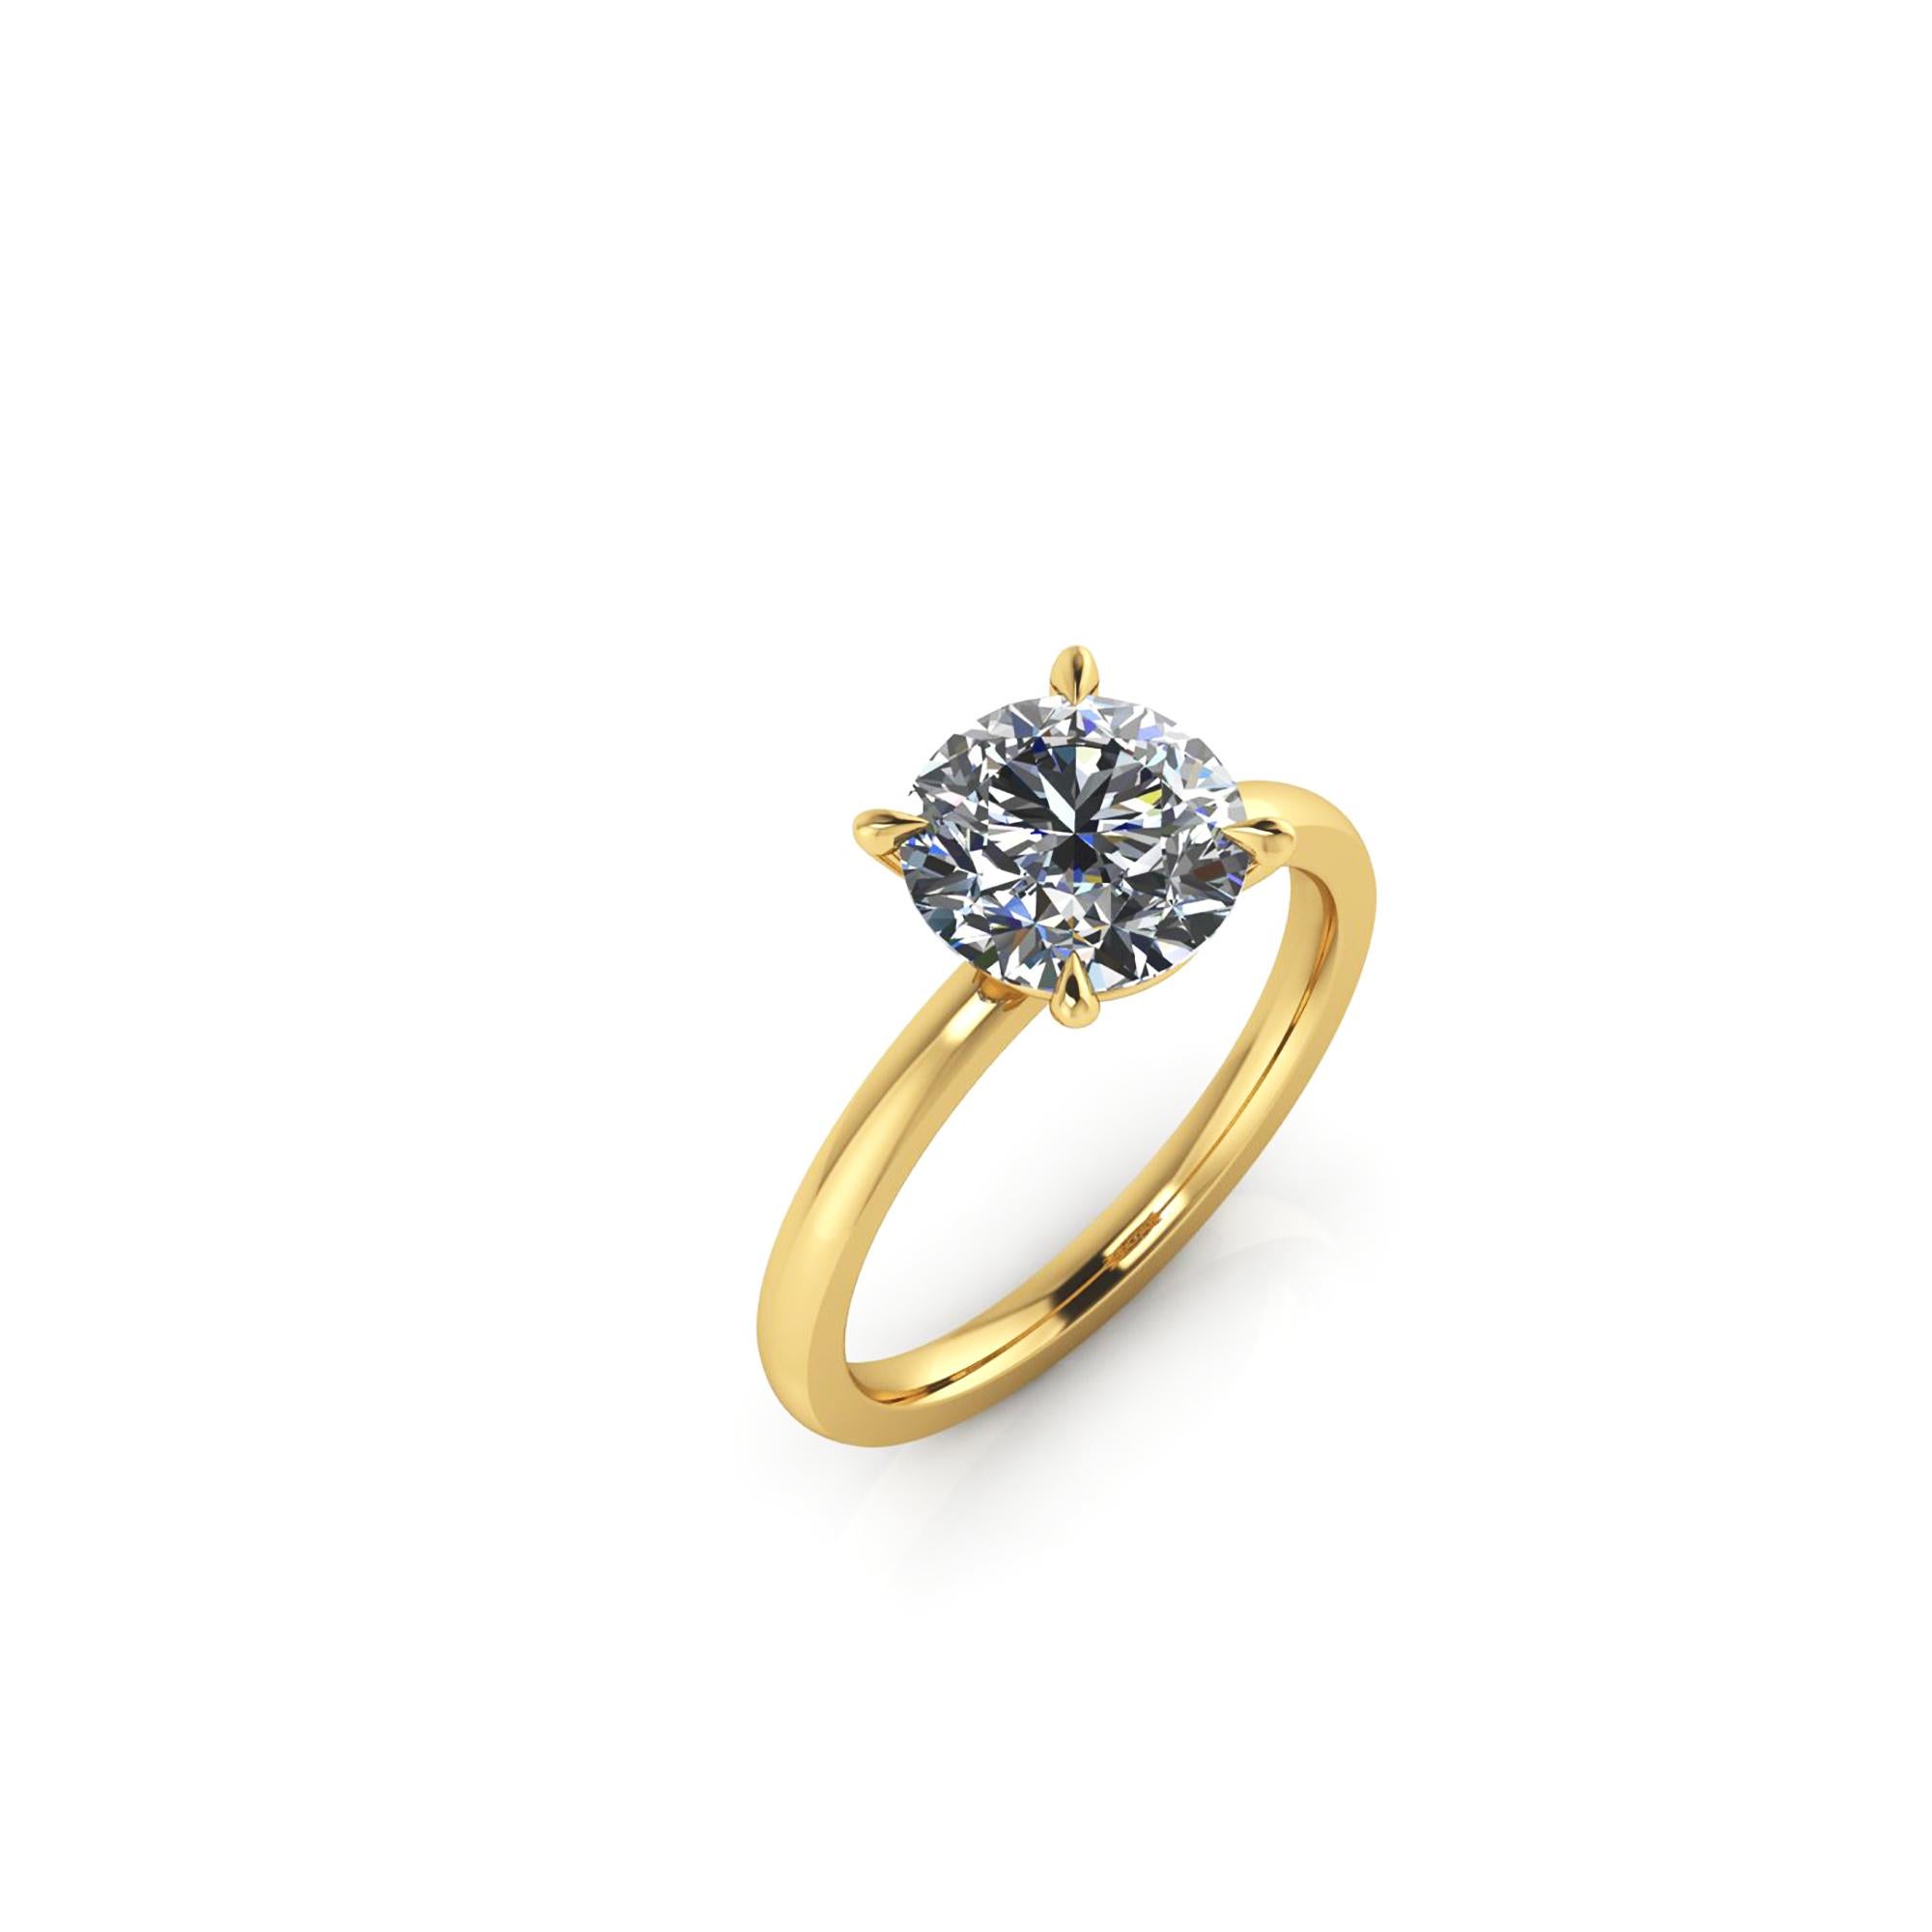 Round Cut GIA Certified 2.01 Carat Diamond in 18 Karat Yellow Gold Solitaire Ring For Sale